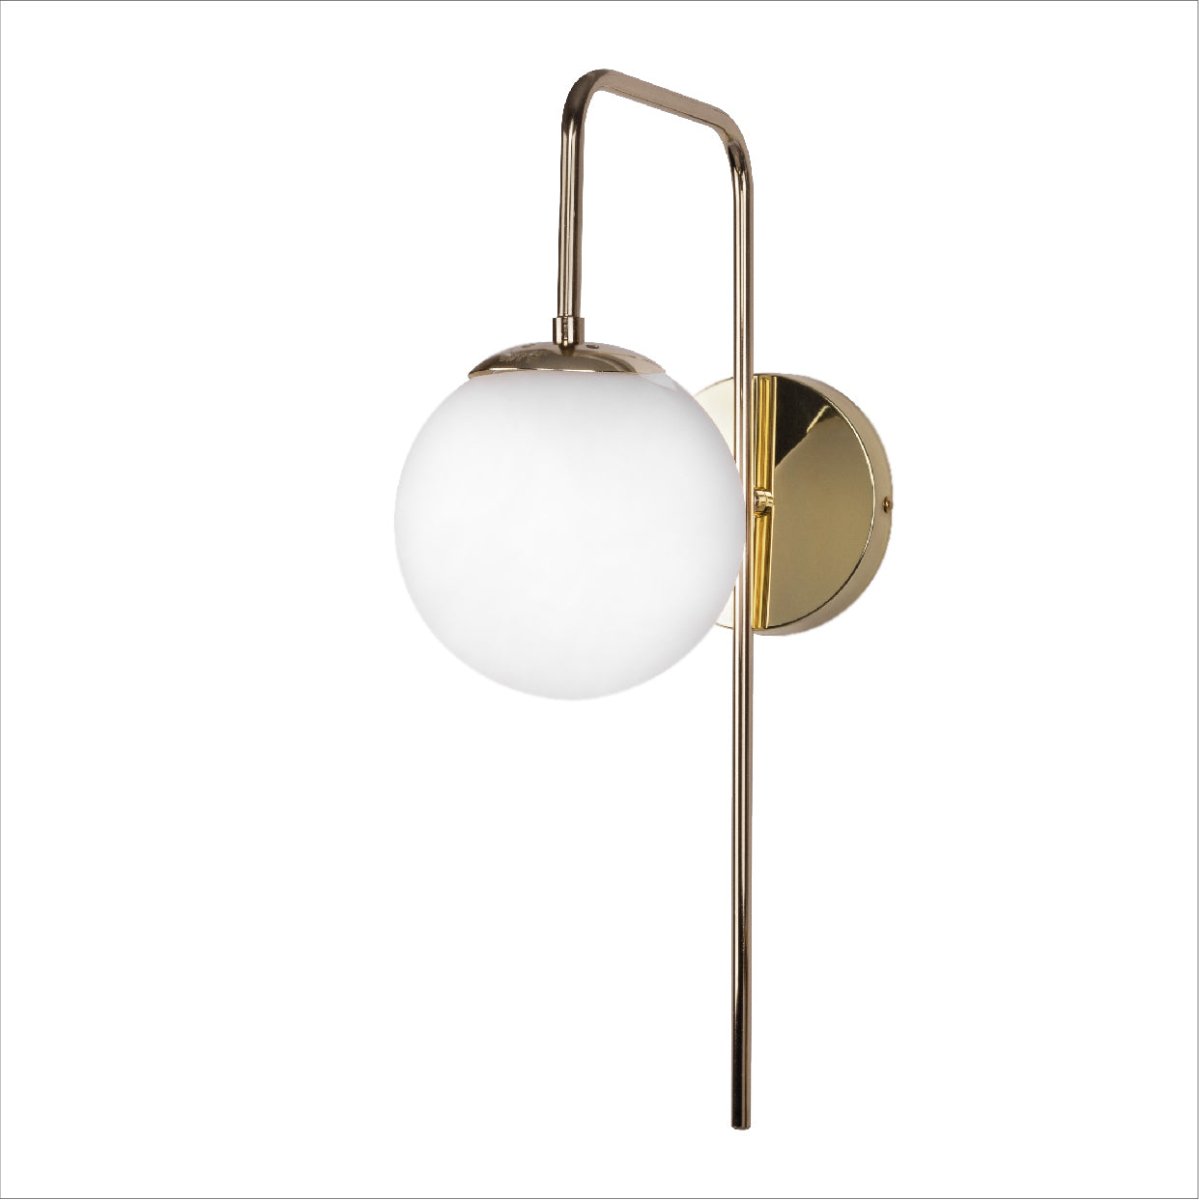 Main image of Opal Globe Glass Bronze Cane Metal Downward Wall Light with E27 Fitting | TEKLED 151-19524